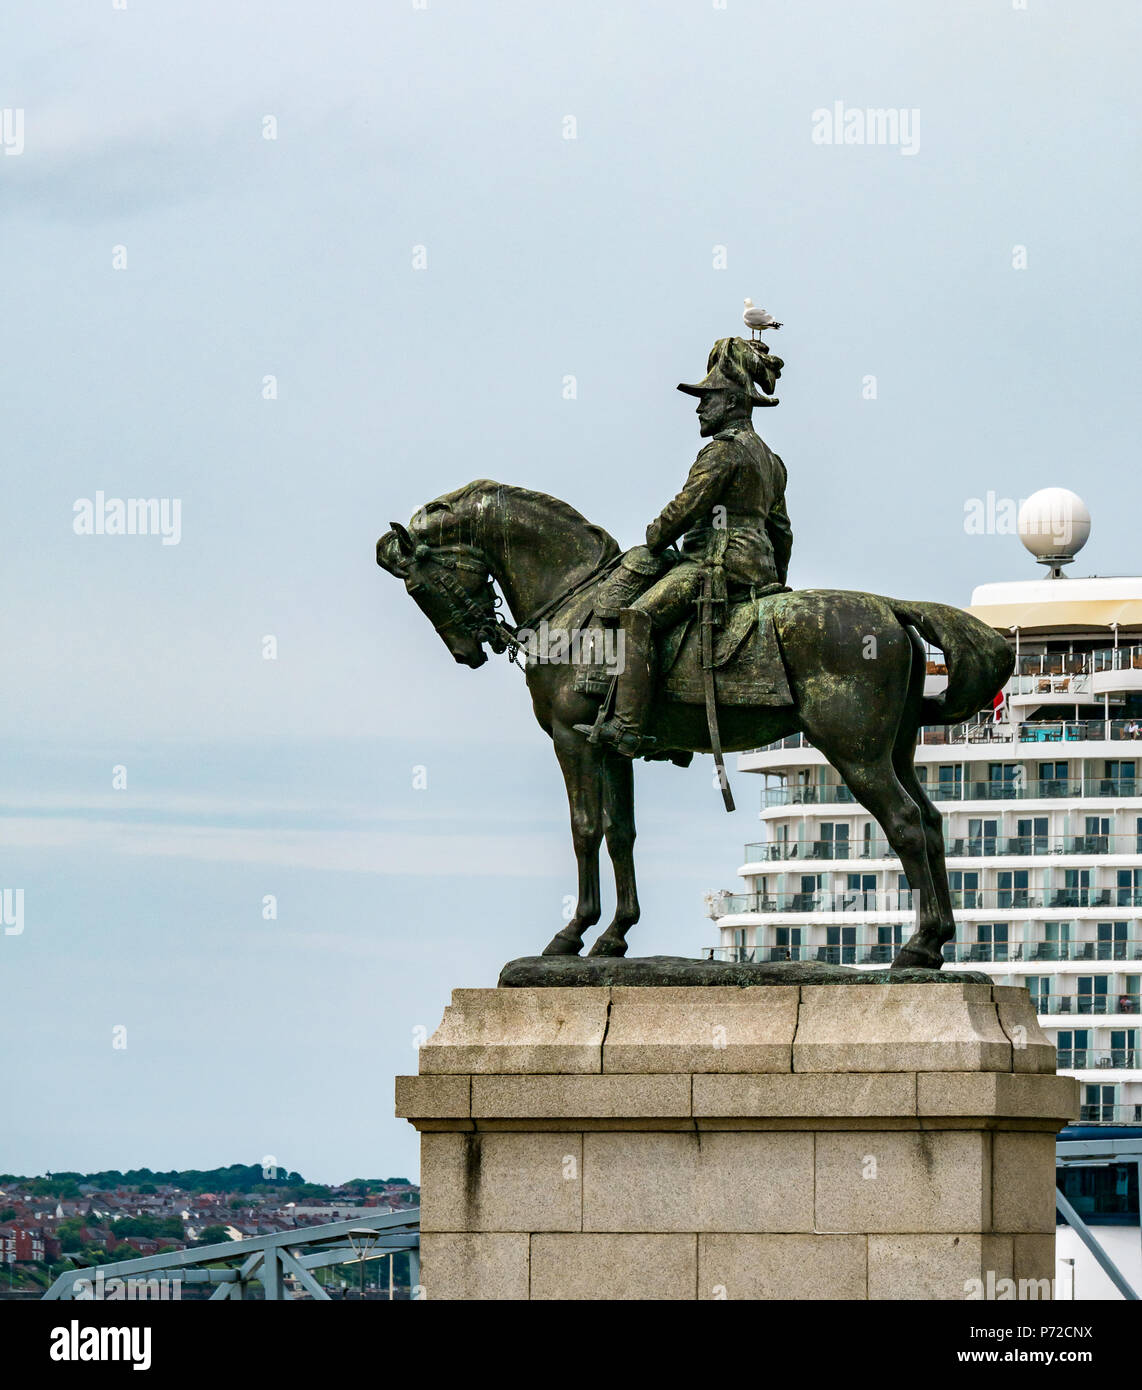 Equestrian statue King Edward VII by Sir William Goscombe John with docked cruise ship, Pier Head, Liverpool, England, UK Stock Photo